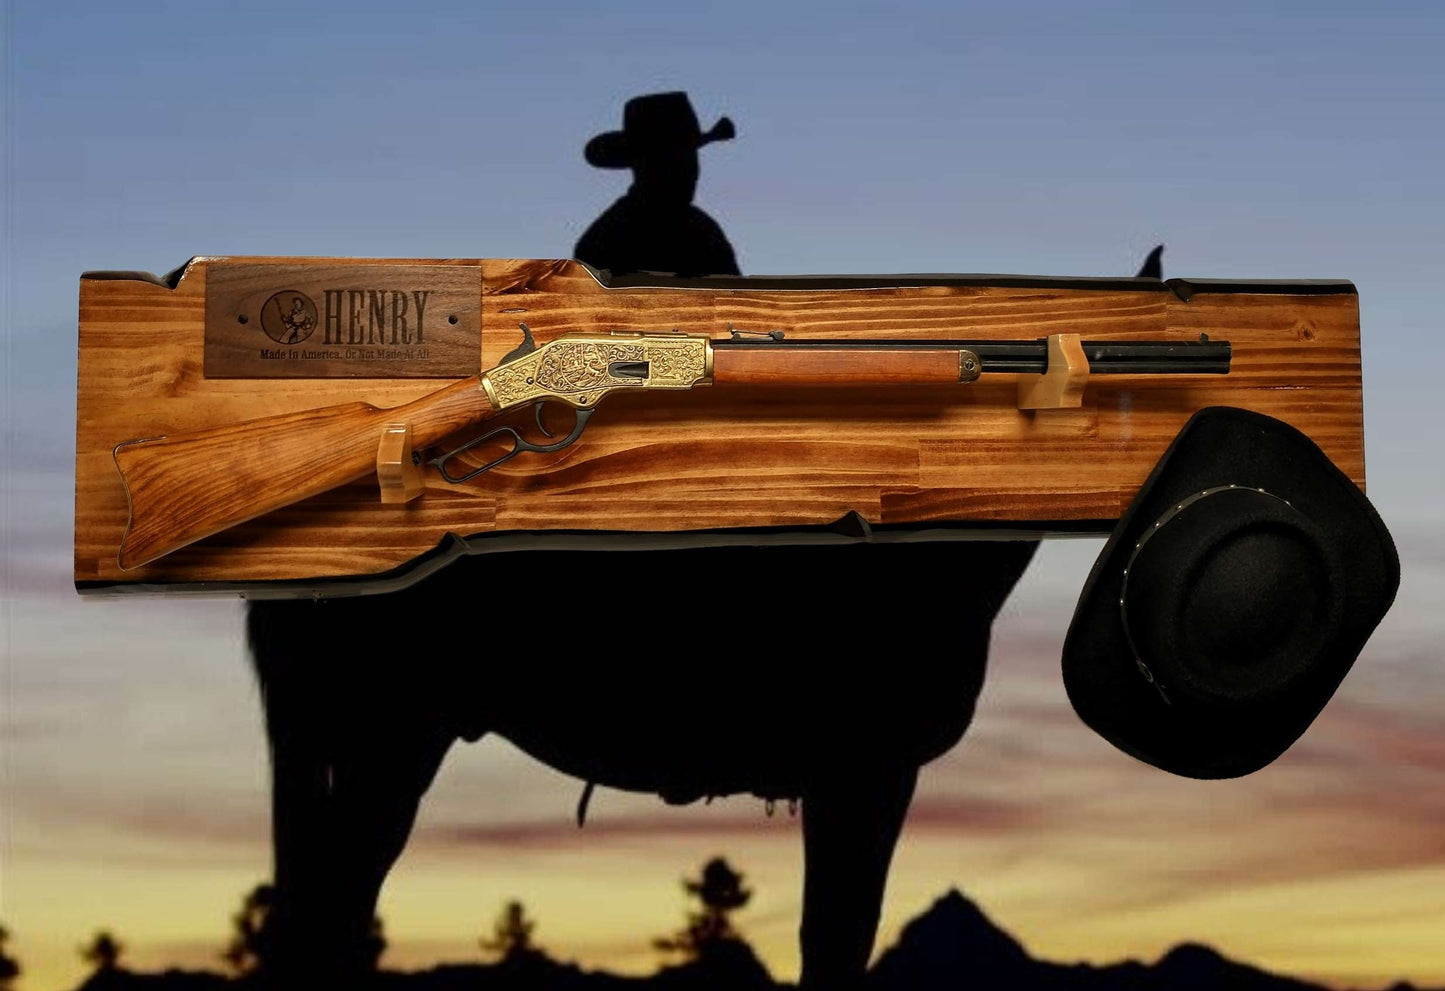 Walker Wood Gifts sword display Lever Action Rustic Henry Gun Rack Display Rifle Faux Live Edge Knotty Pine Cabin Décor Collectors Gift